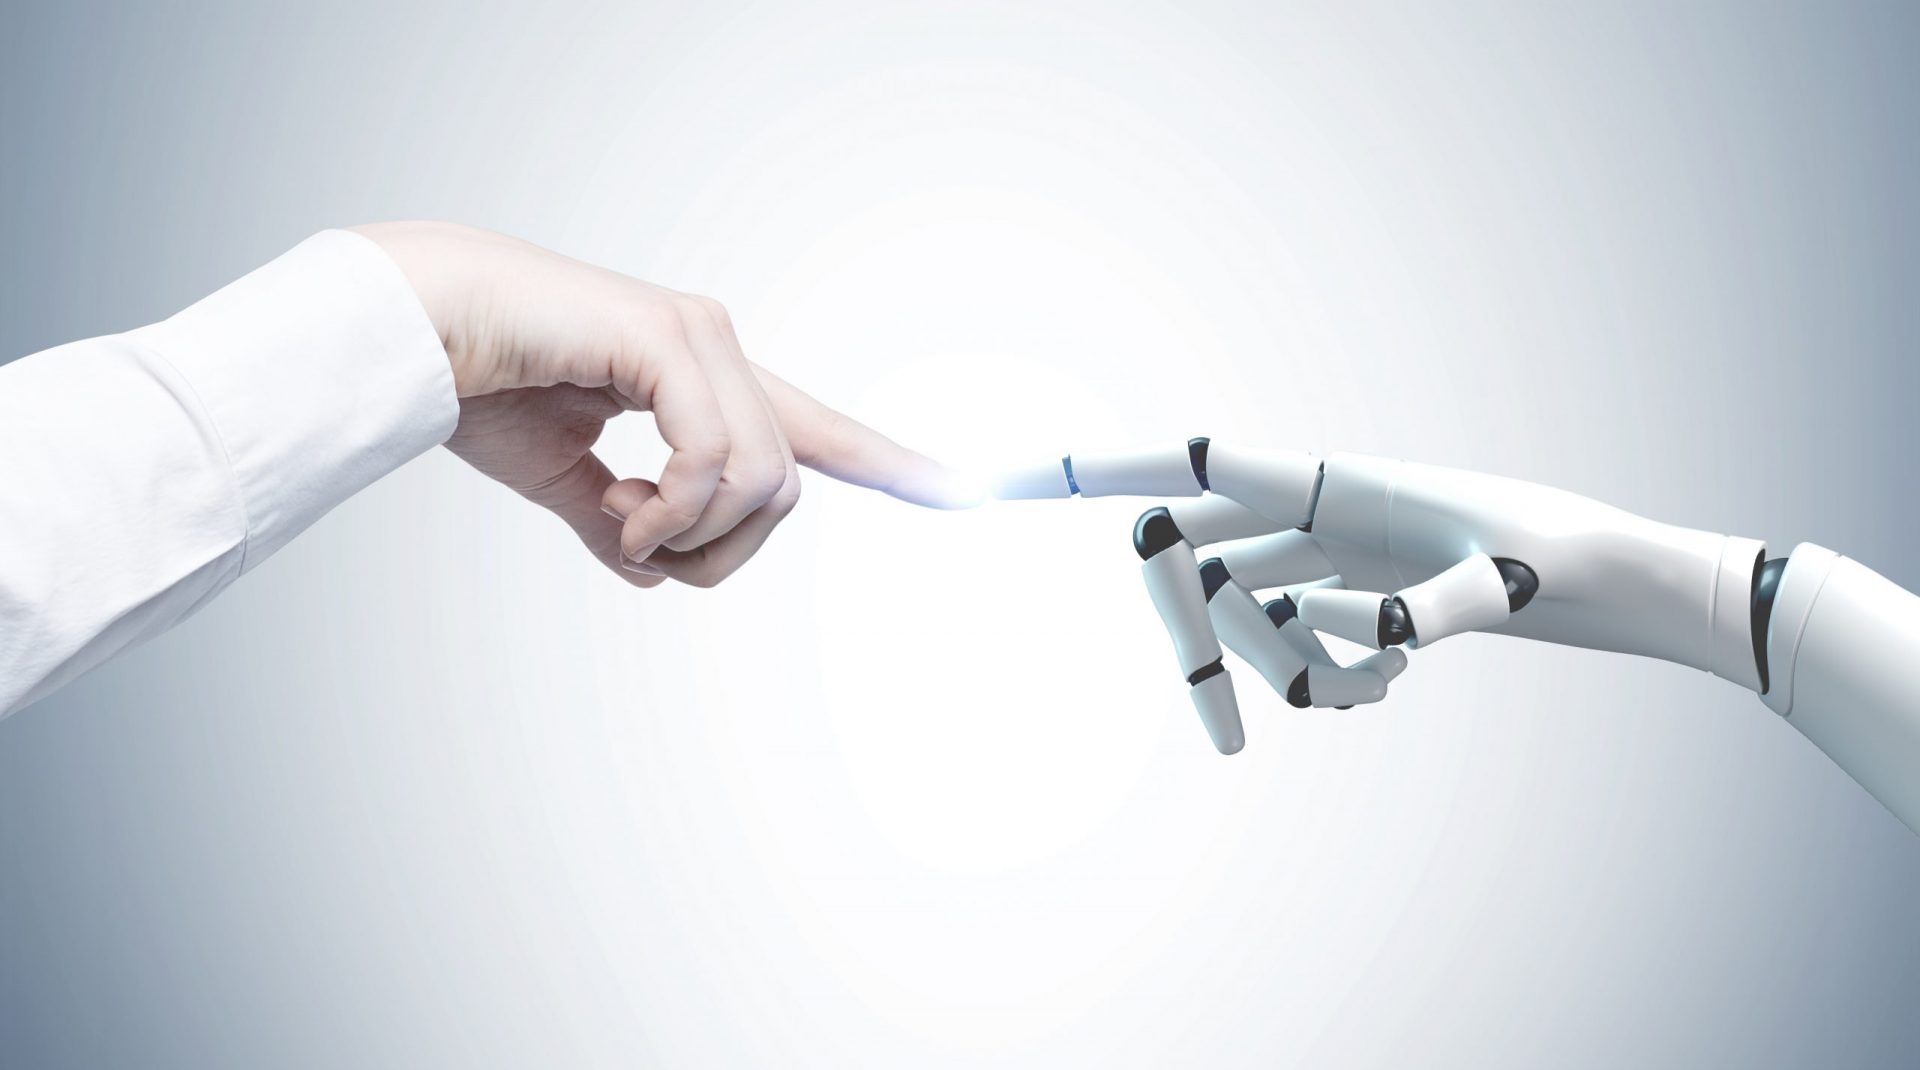 Human and Robot Hand Reaching out and touching in the Index finger